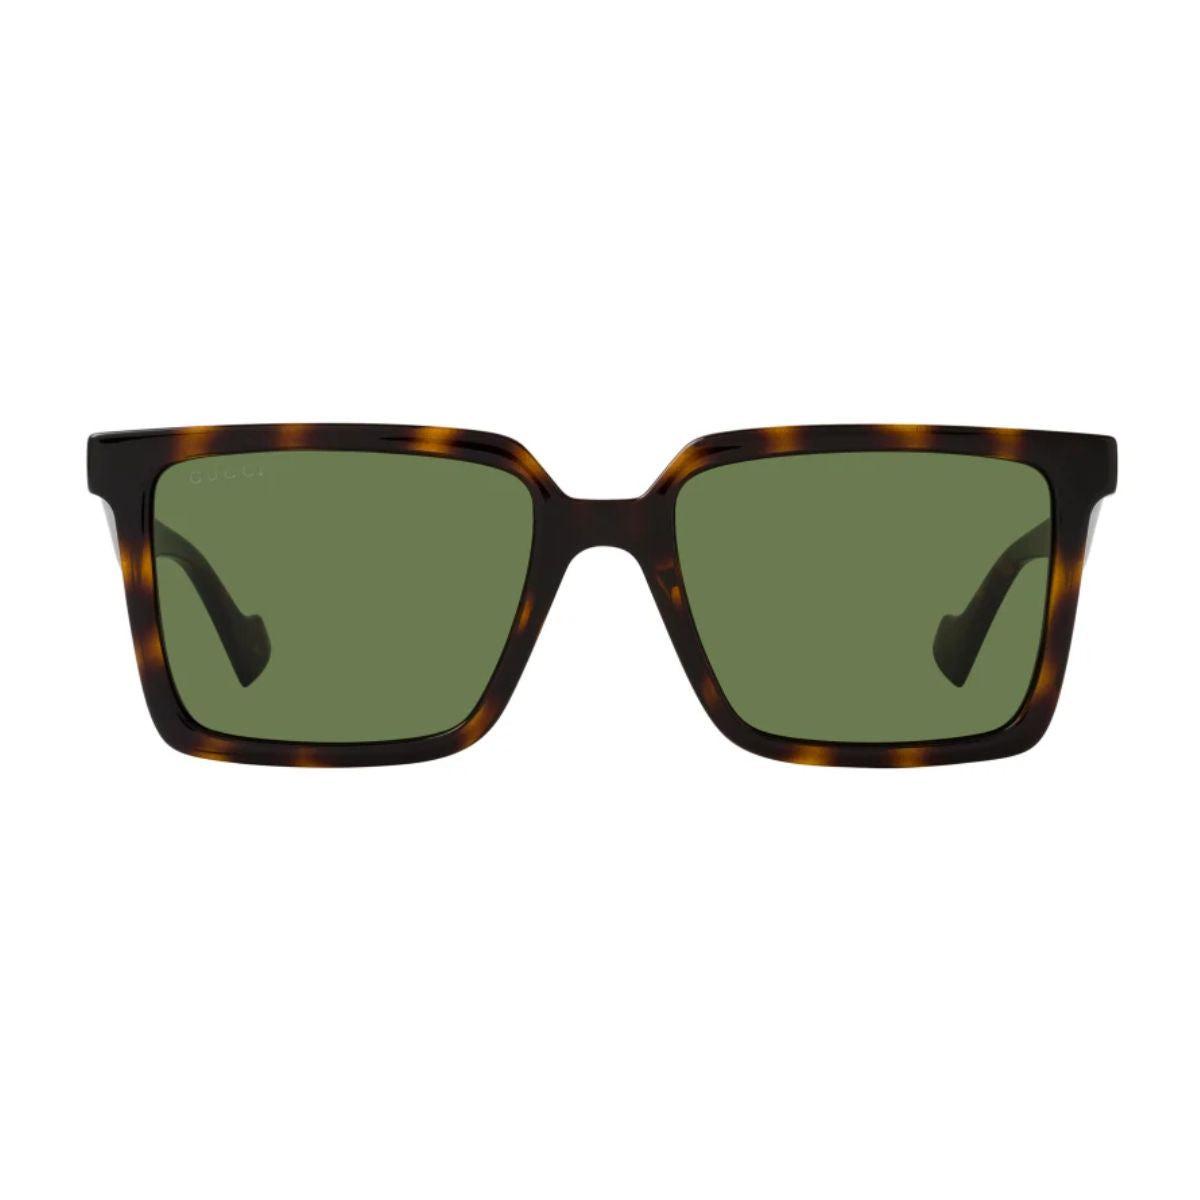 "Gucci Eyeglasses: Elevate Your Look with 1540S 002 Sunglasses for Men at Optorium"